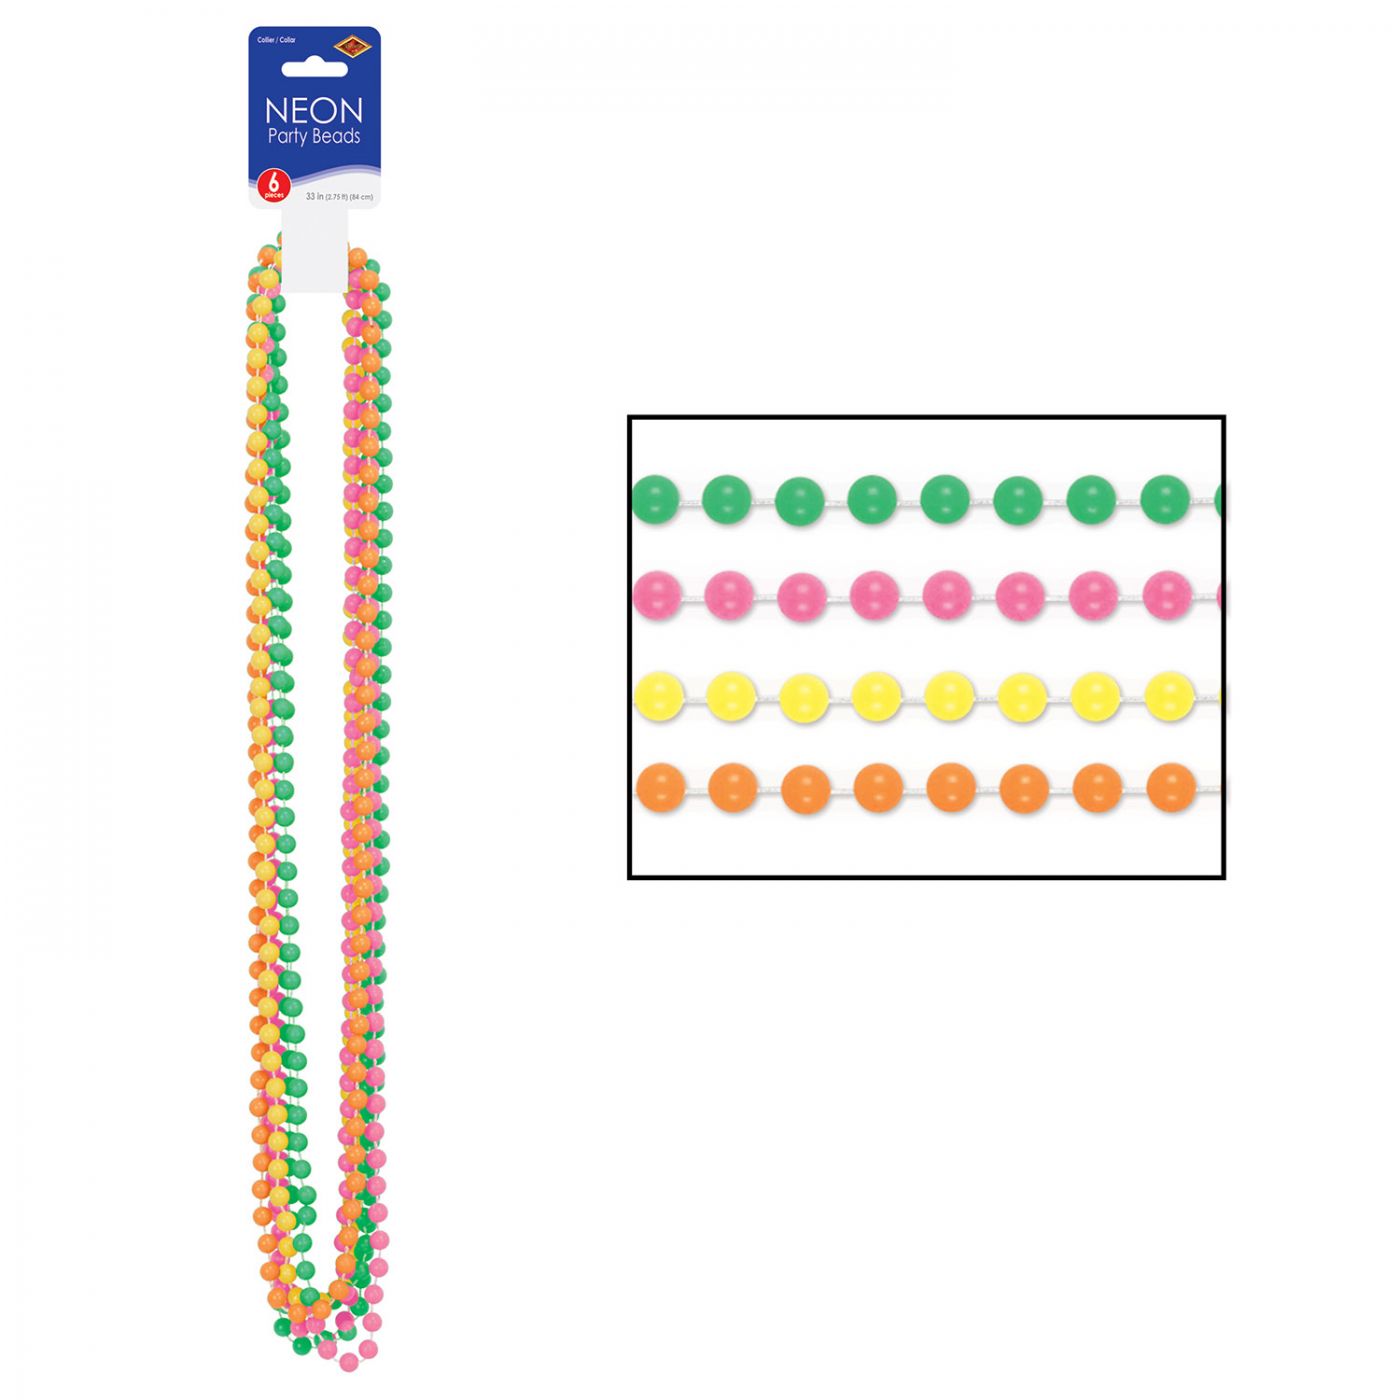 Neon Party Beads image